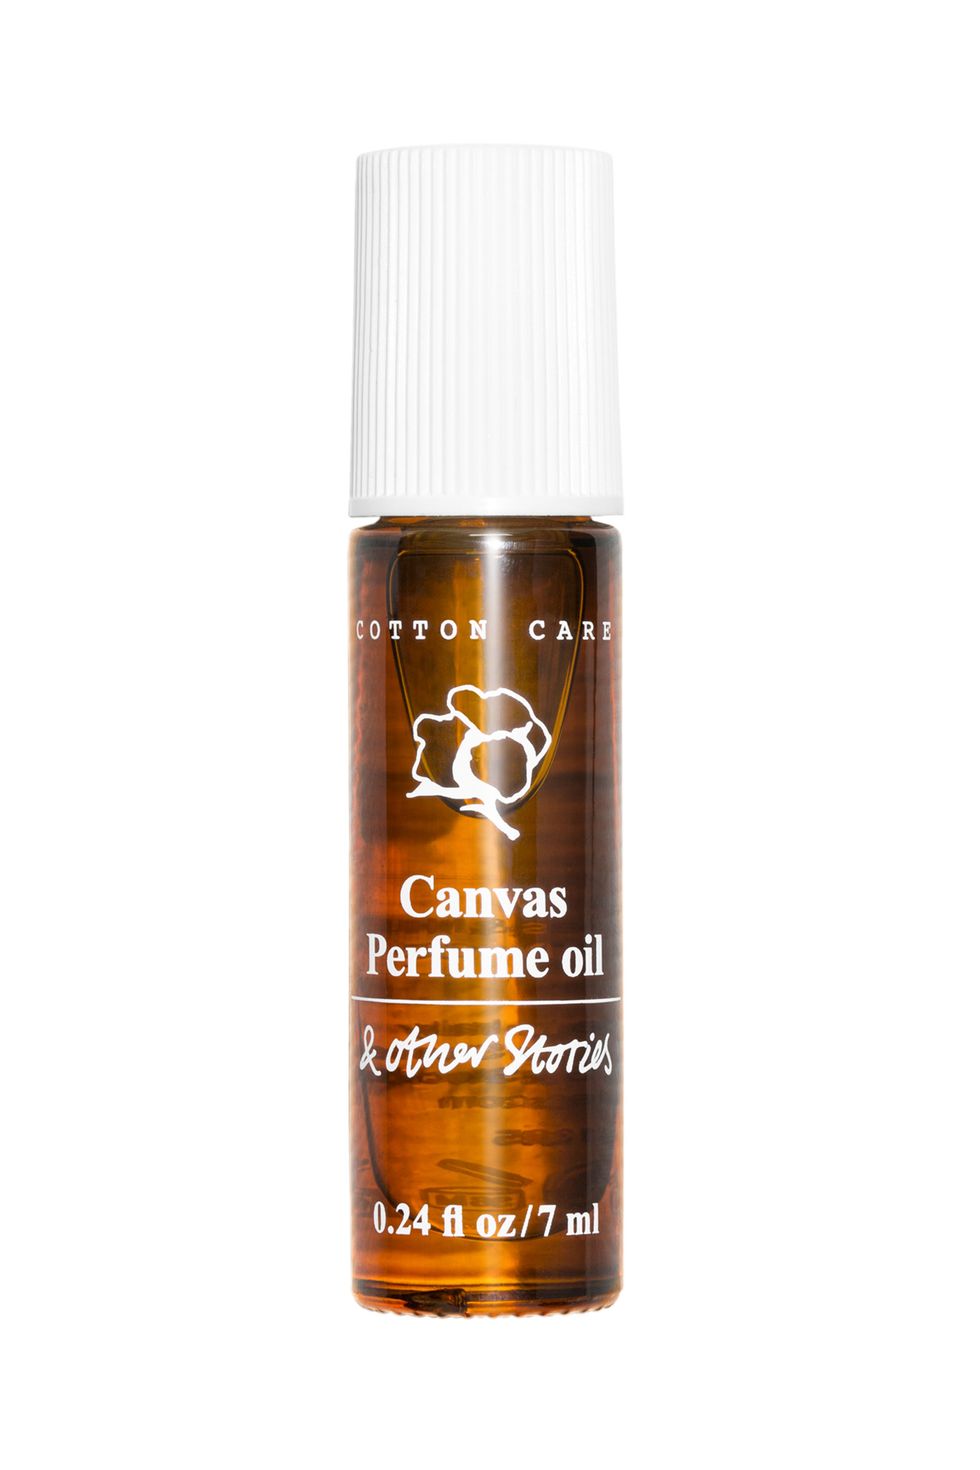 <p>If you have a few summer getaways planned, this little vial is perfect for tucking into a carry-on or an overnight bag. And, oh yeah, it smells divine. The clean scent conjures up images of freshly washed cotton sheets. </p><p><br></p><p>$29 for .24 fl. oz., <a href="http://www.stories.com/us/Beauty/Bath_Body/Fragrance_mists/Canvas_Perfume_Oil/590725-102394790.1" target="_blank">Stories.com</a> </p>